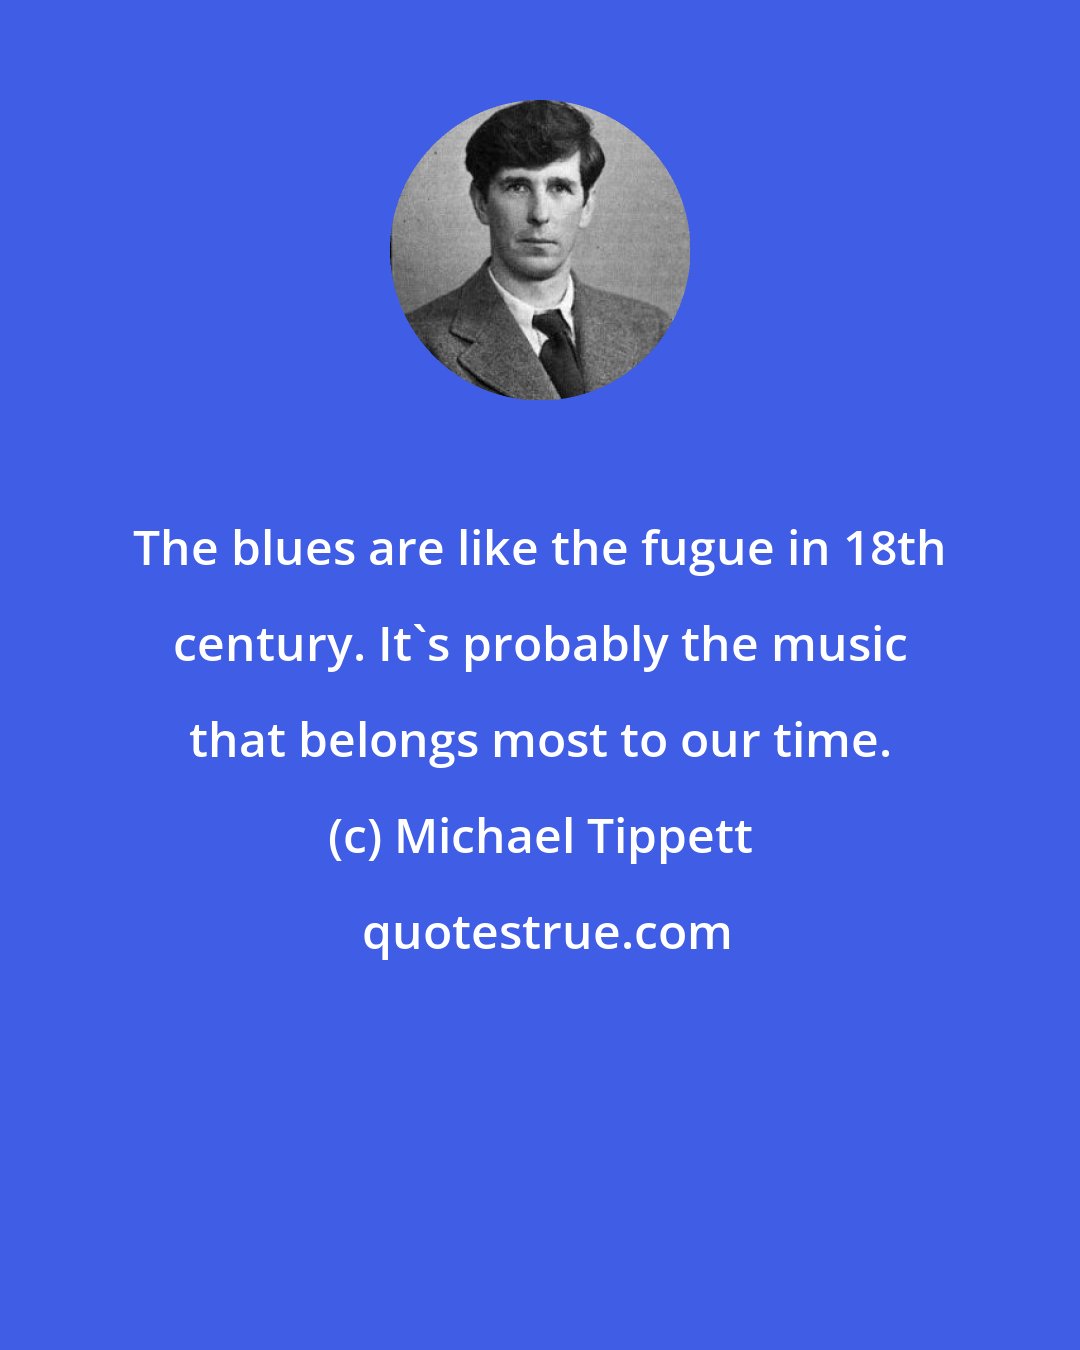 Michael Tippett: The blues are like the fugue in 18th century. It's probably the music that belongs most to our time.